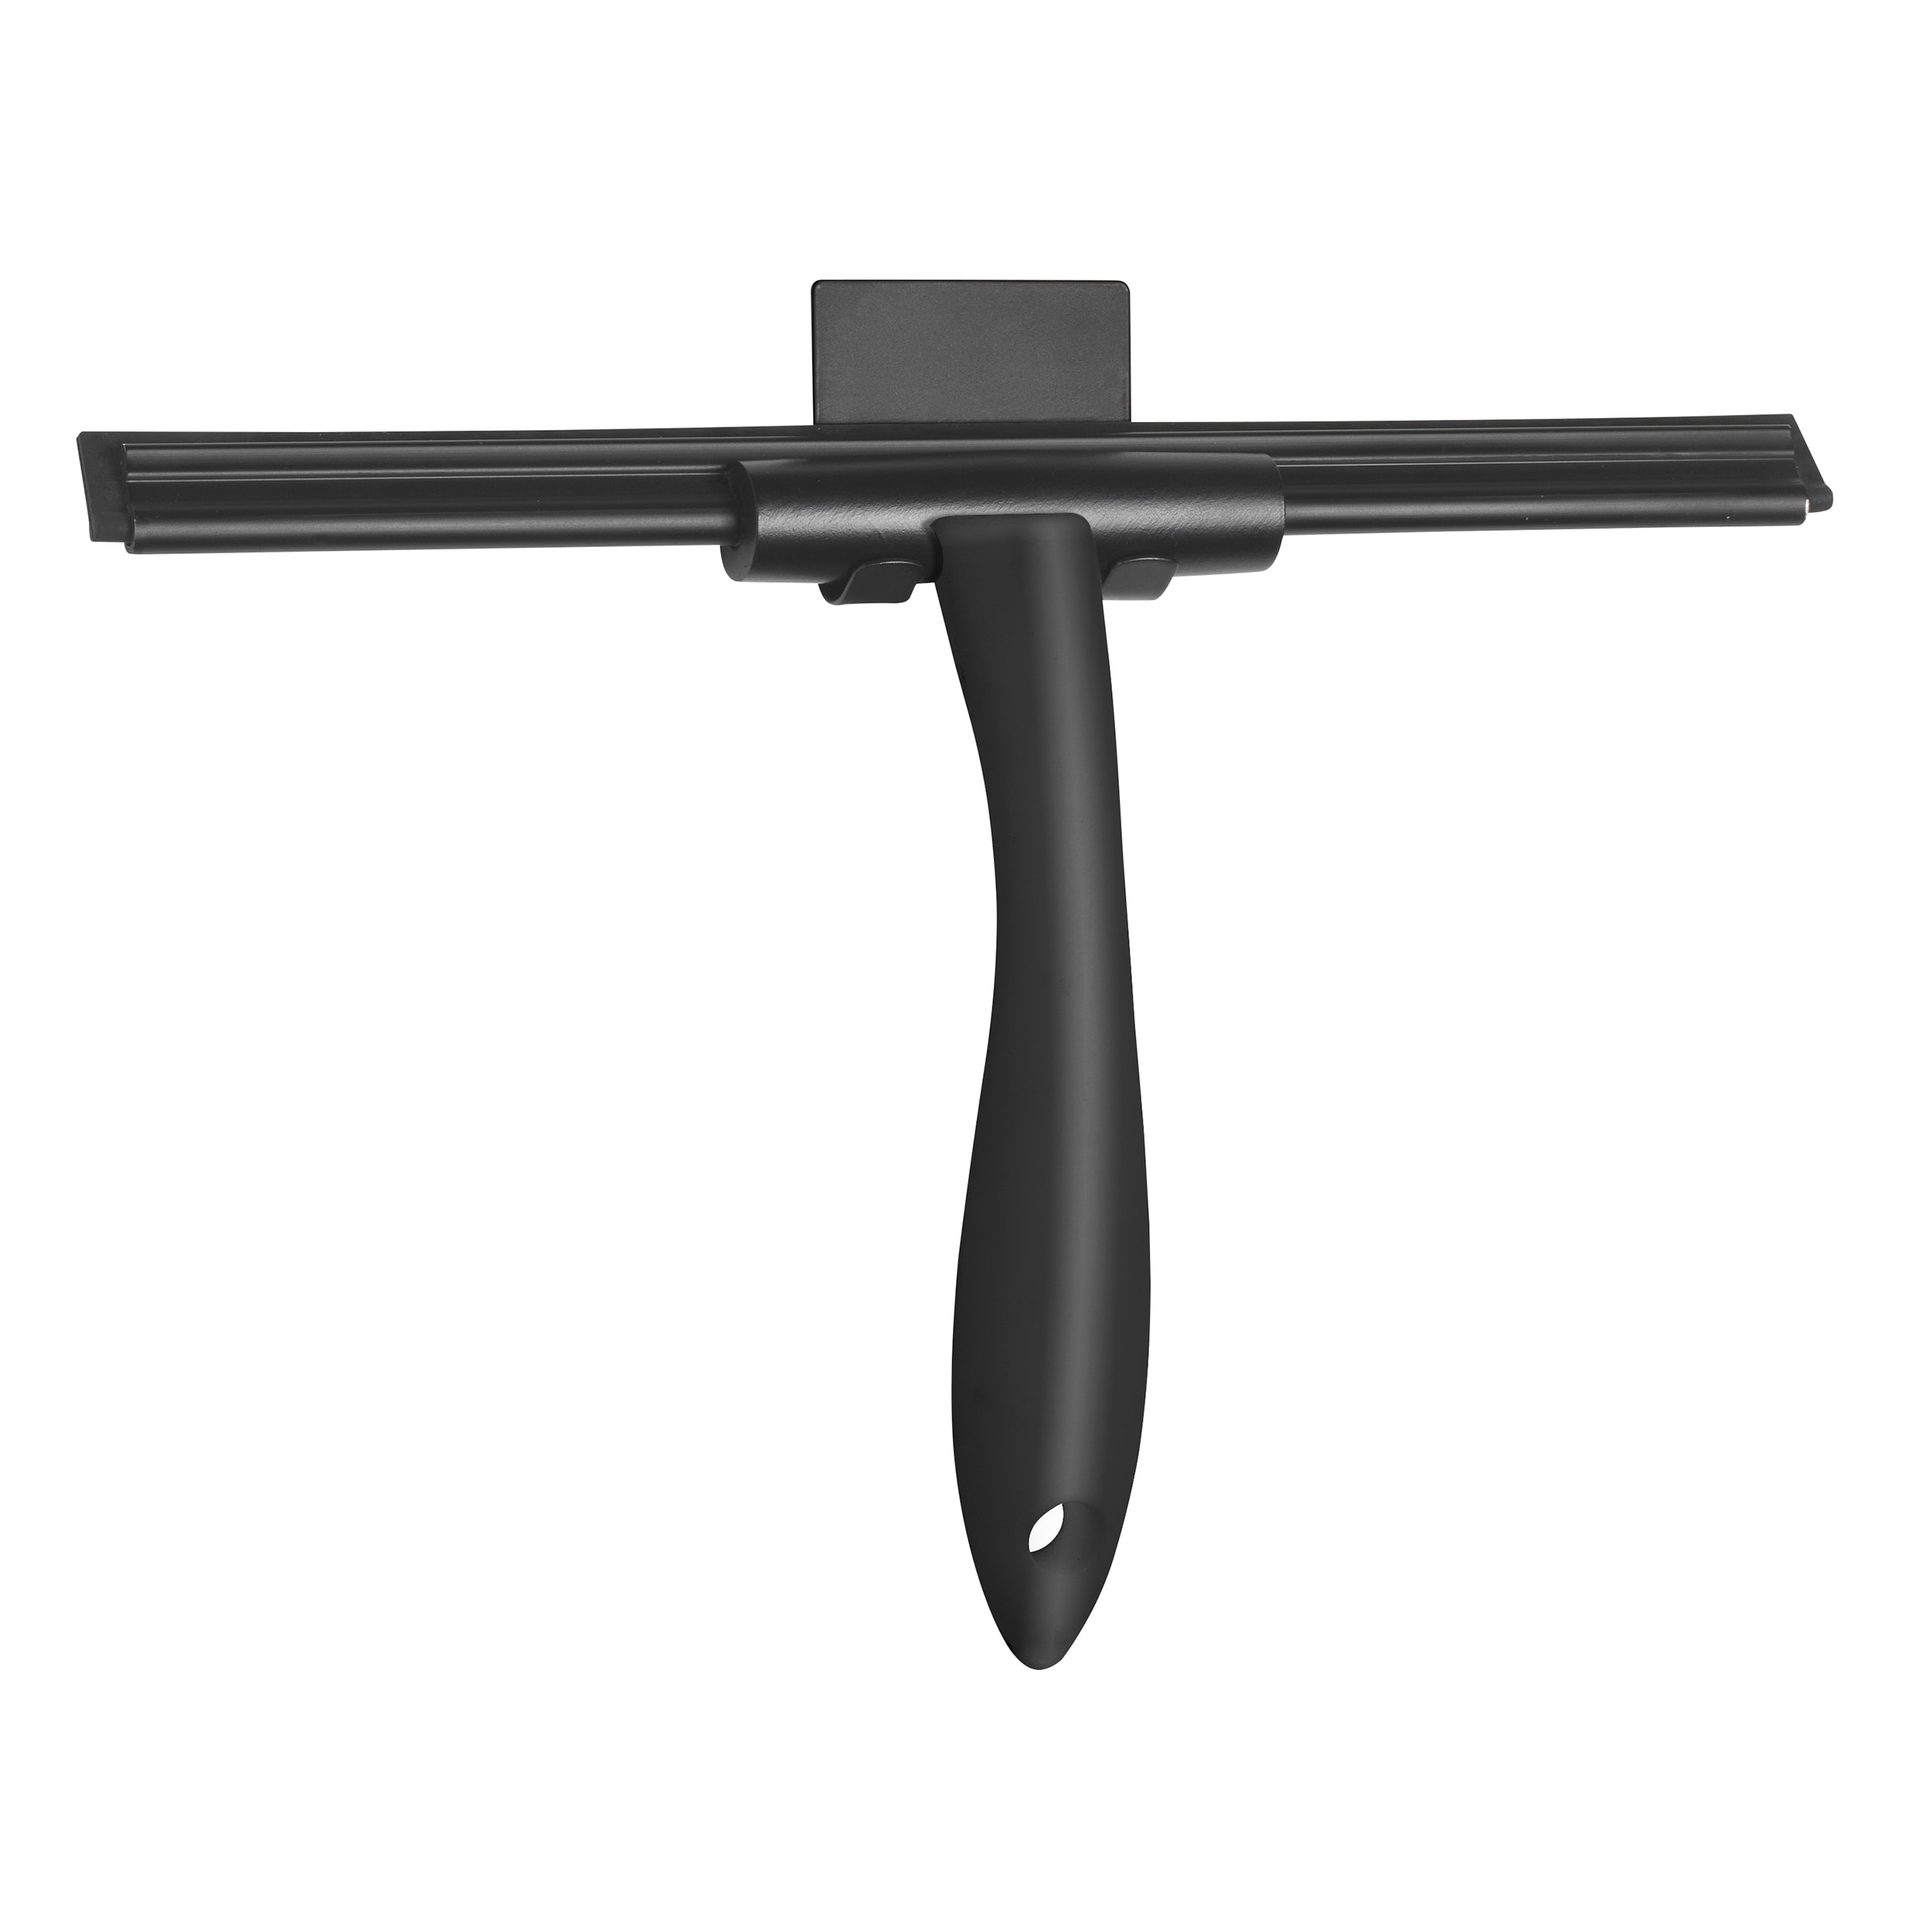 Home-pro Quickie Homepro 8 Shower Squeegee 